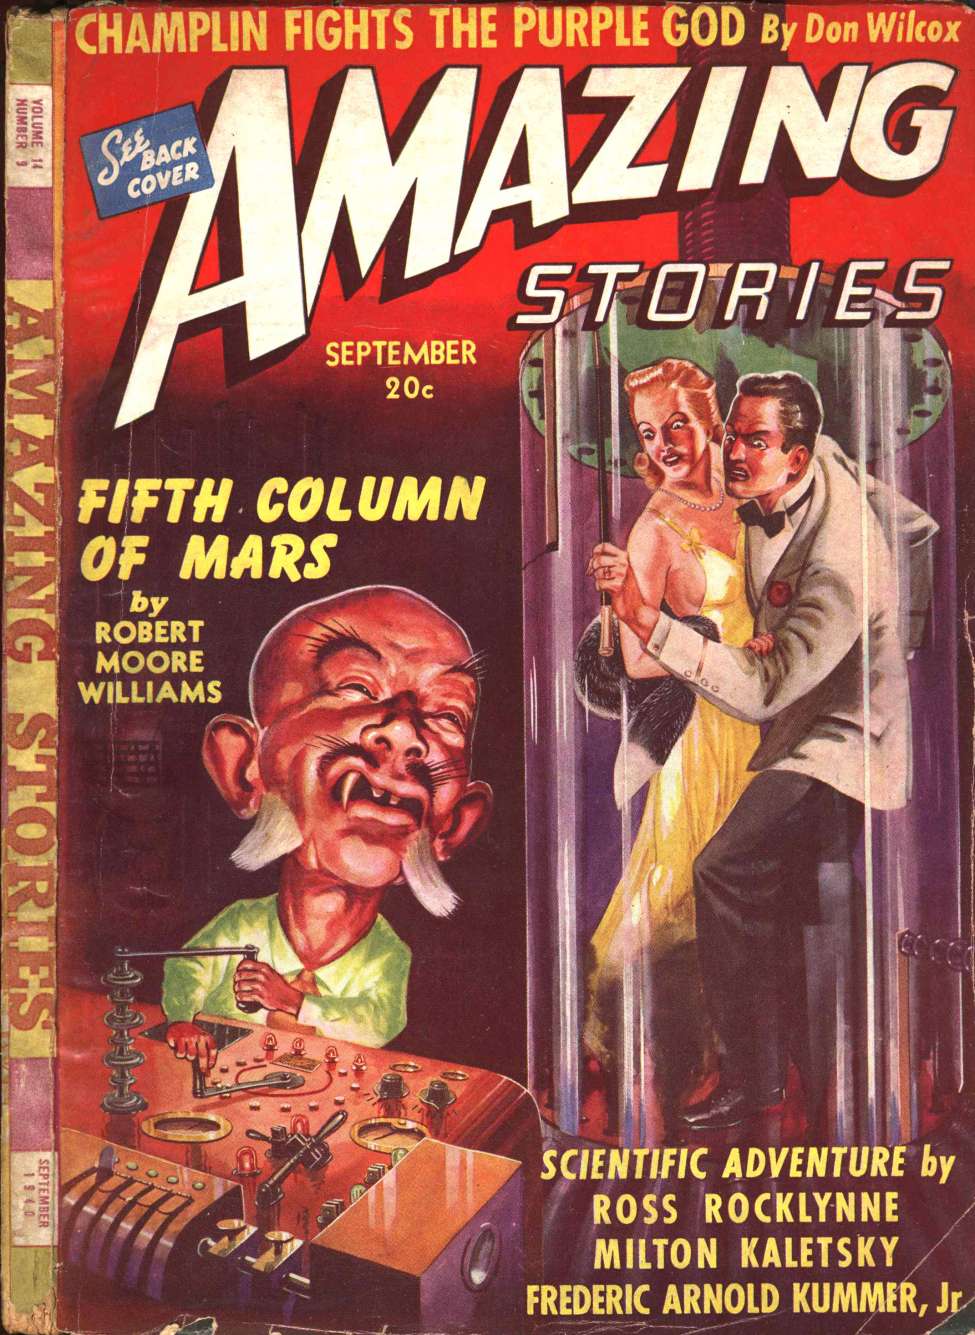 Book Cover For Amazing Stories v14 9 - Fifth Column of Mars - Robert Moore Williams